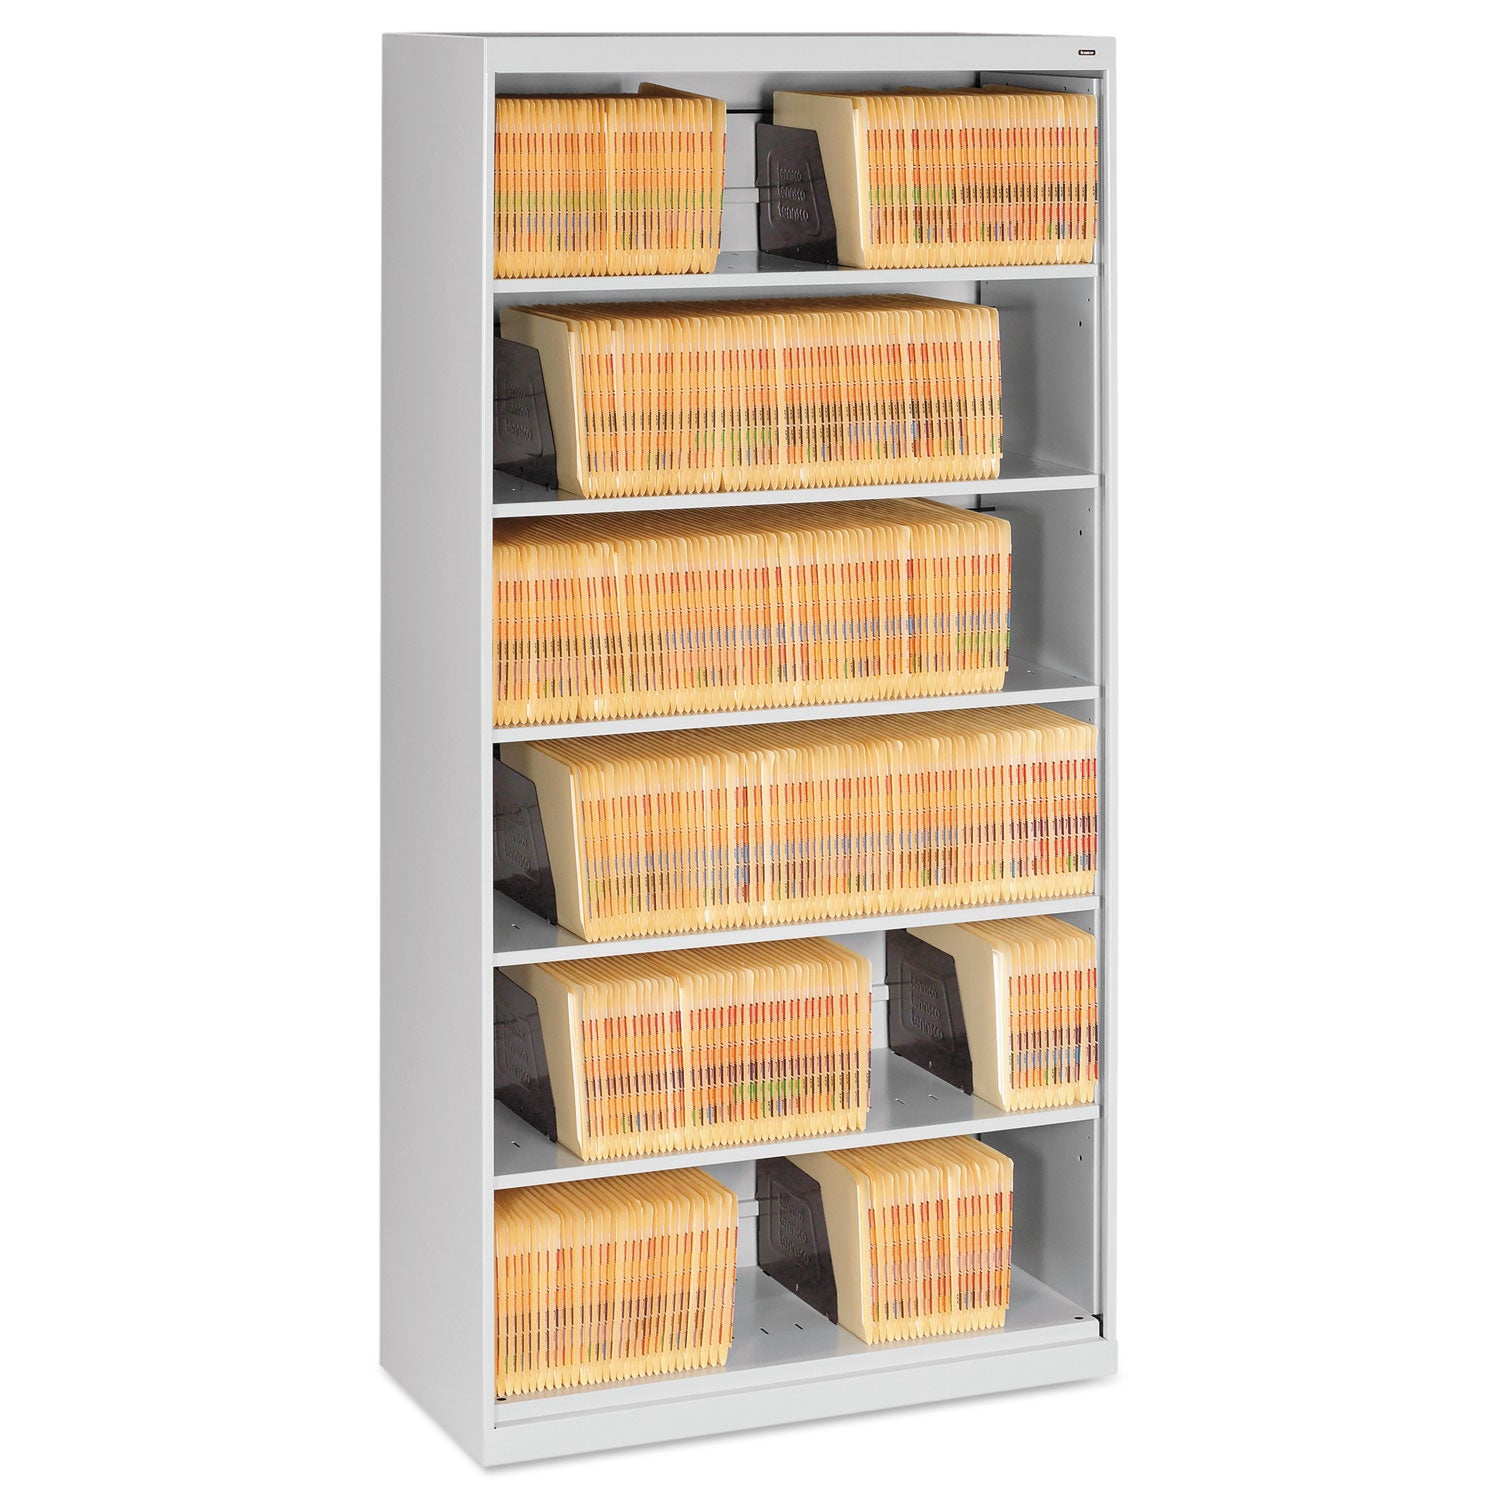 fixed-shelf-open-format-lateral-file-for-end-tab-folders-6-legal-letter-file-shelves-light-gray-36-x-165-x-7525_tnnfs360lgy - 1